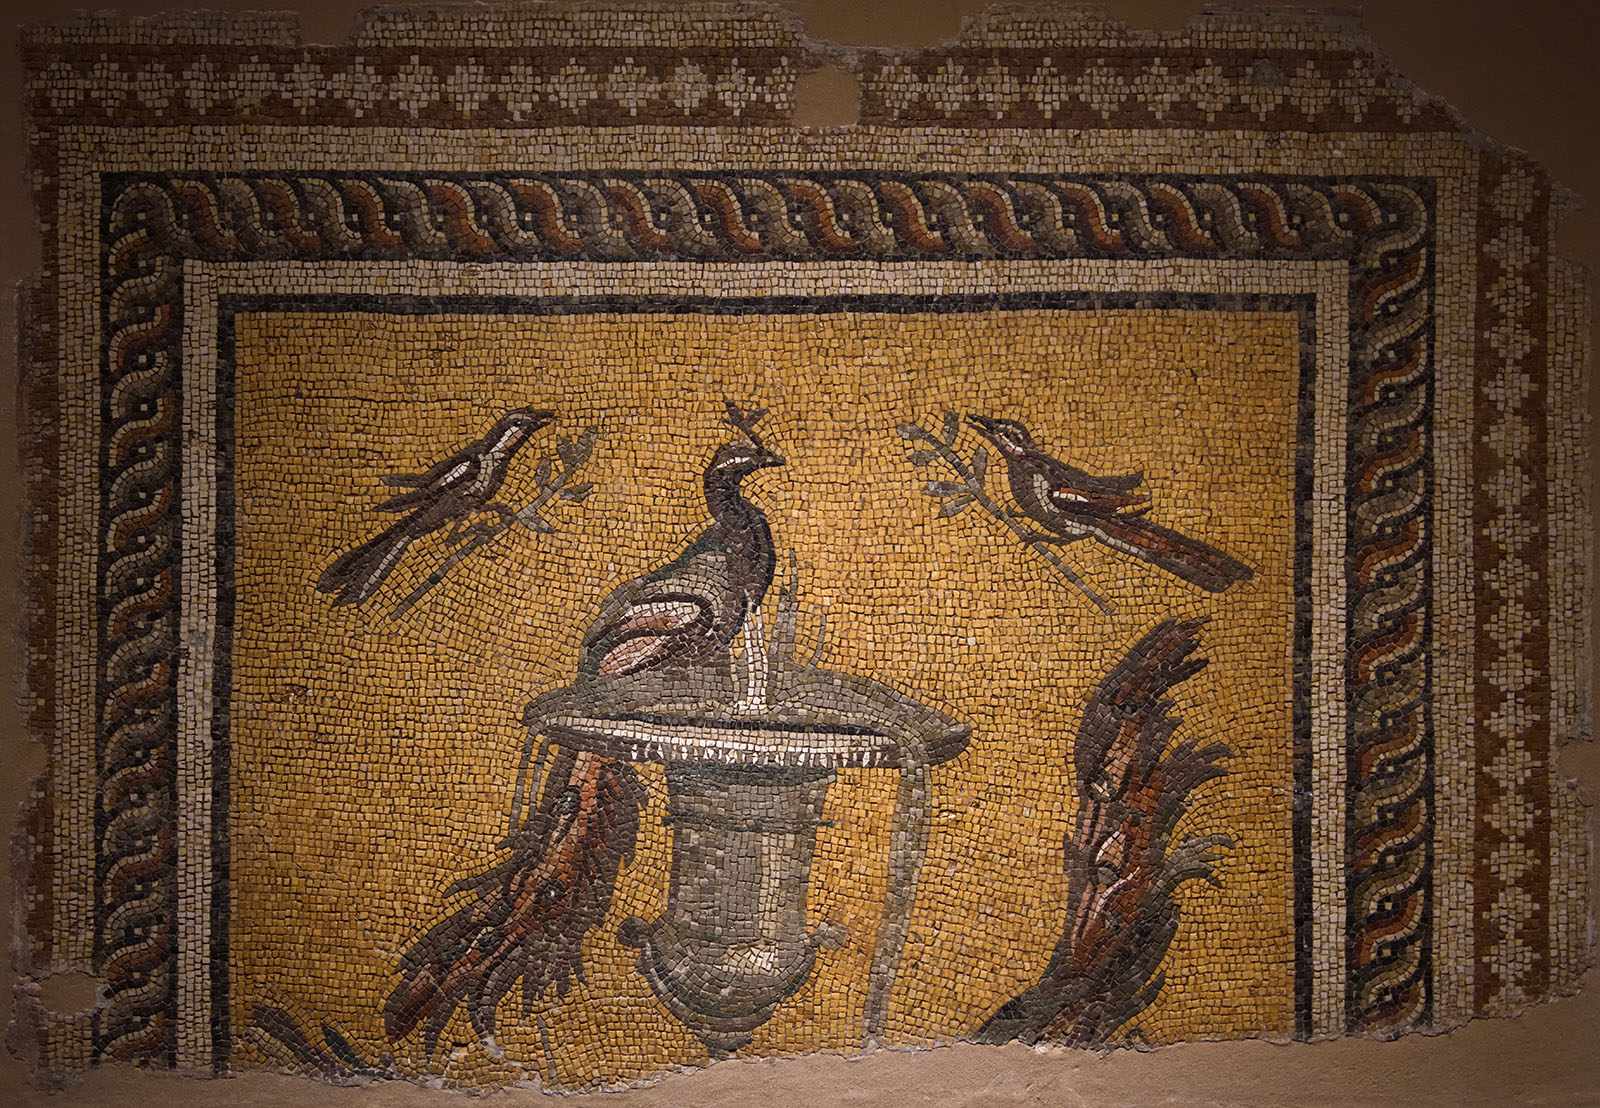 Antakya Archaeology Museum Peacock and other birds mosaic sept 2019 6125.jpg